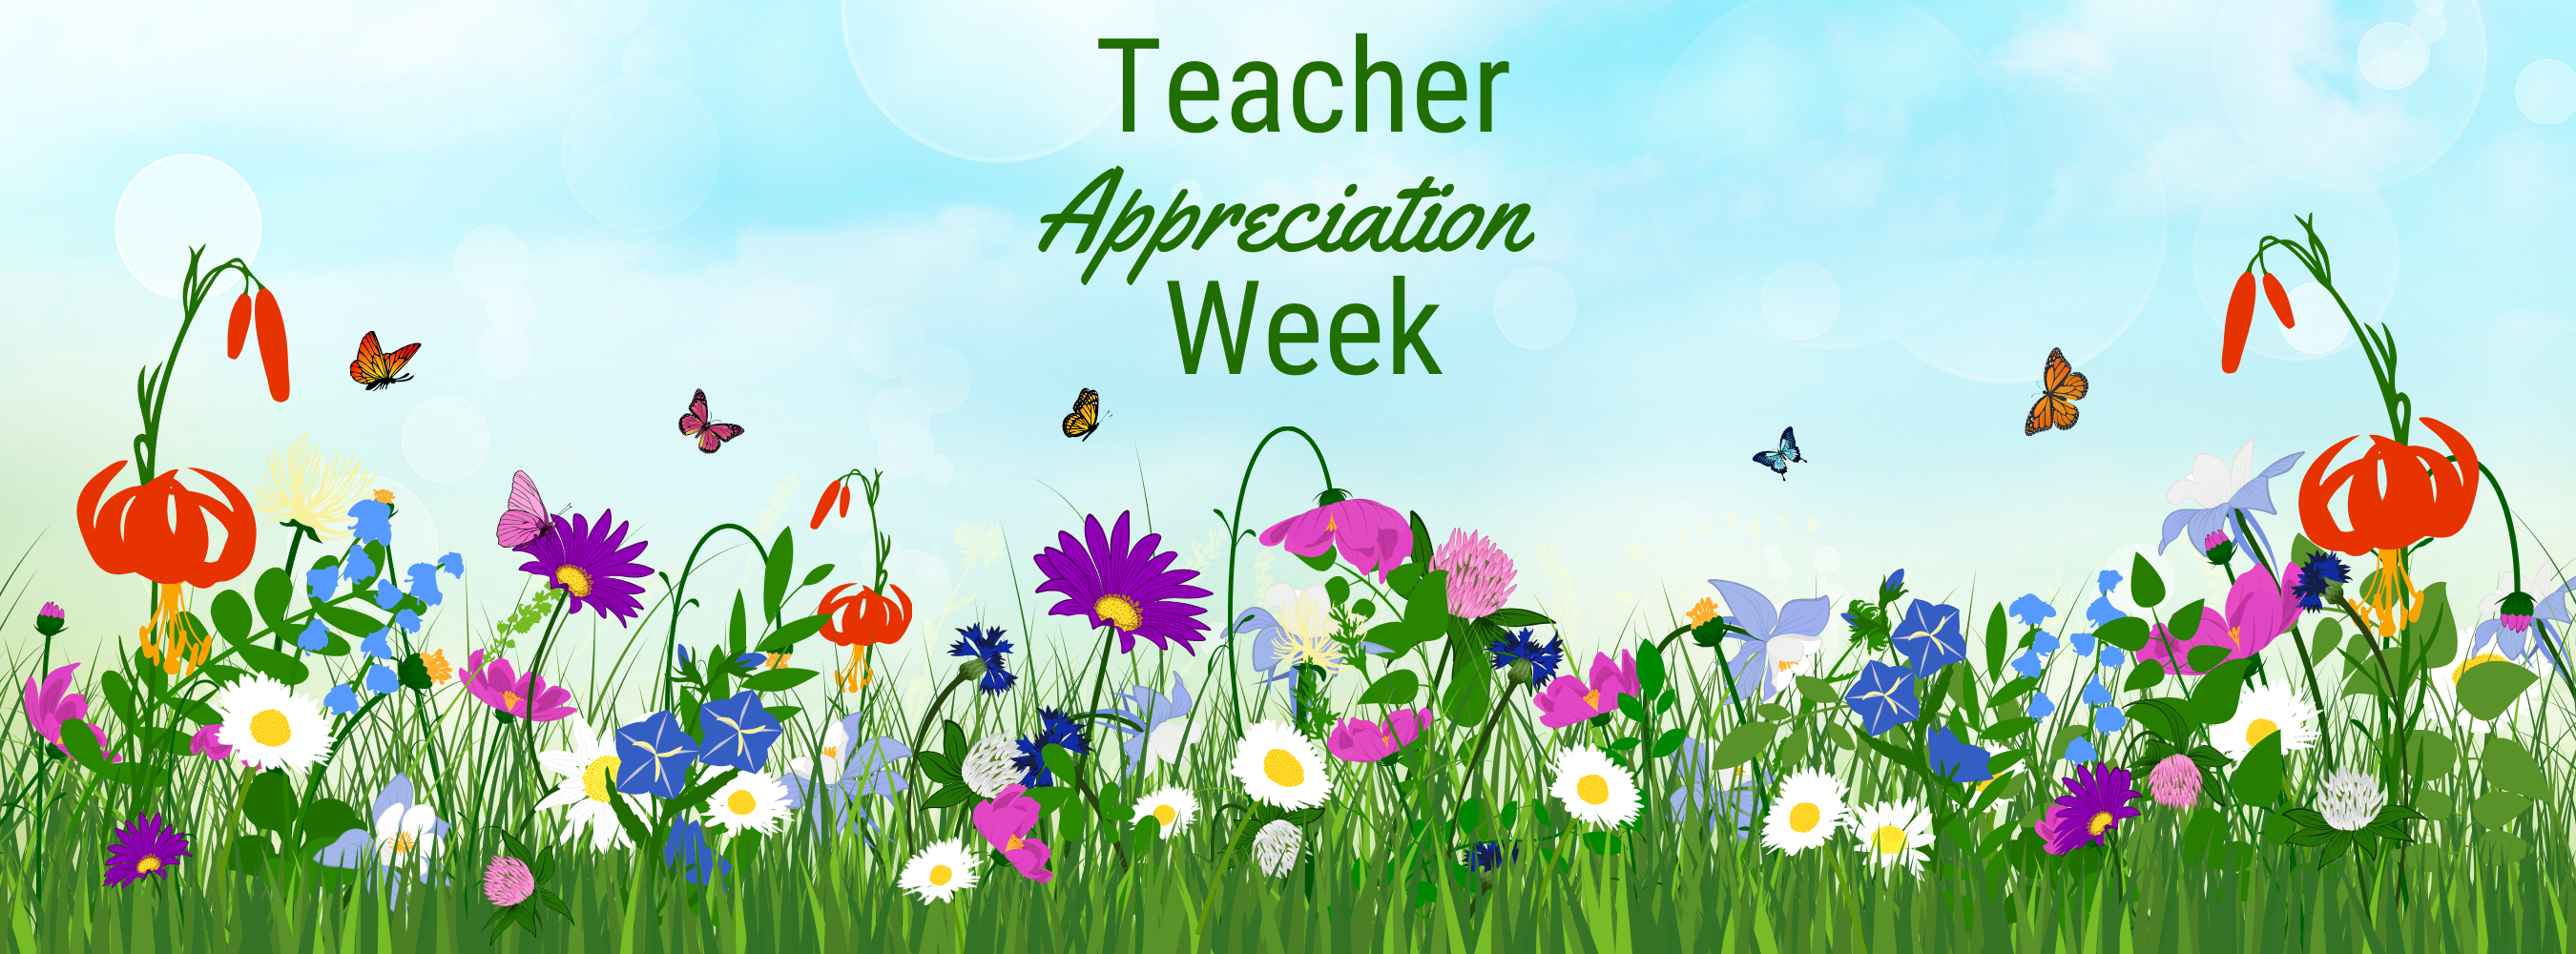 Flowers against the sky with text exclaiming that it is teacher appreciation week.